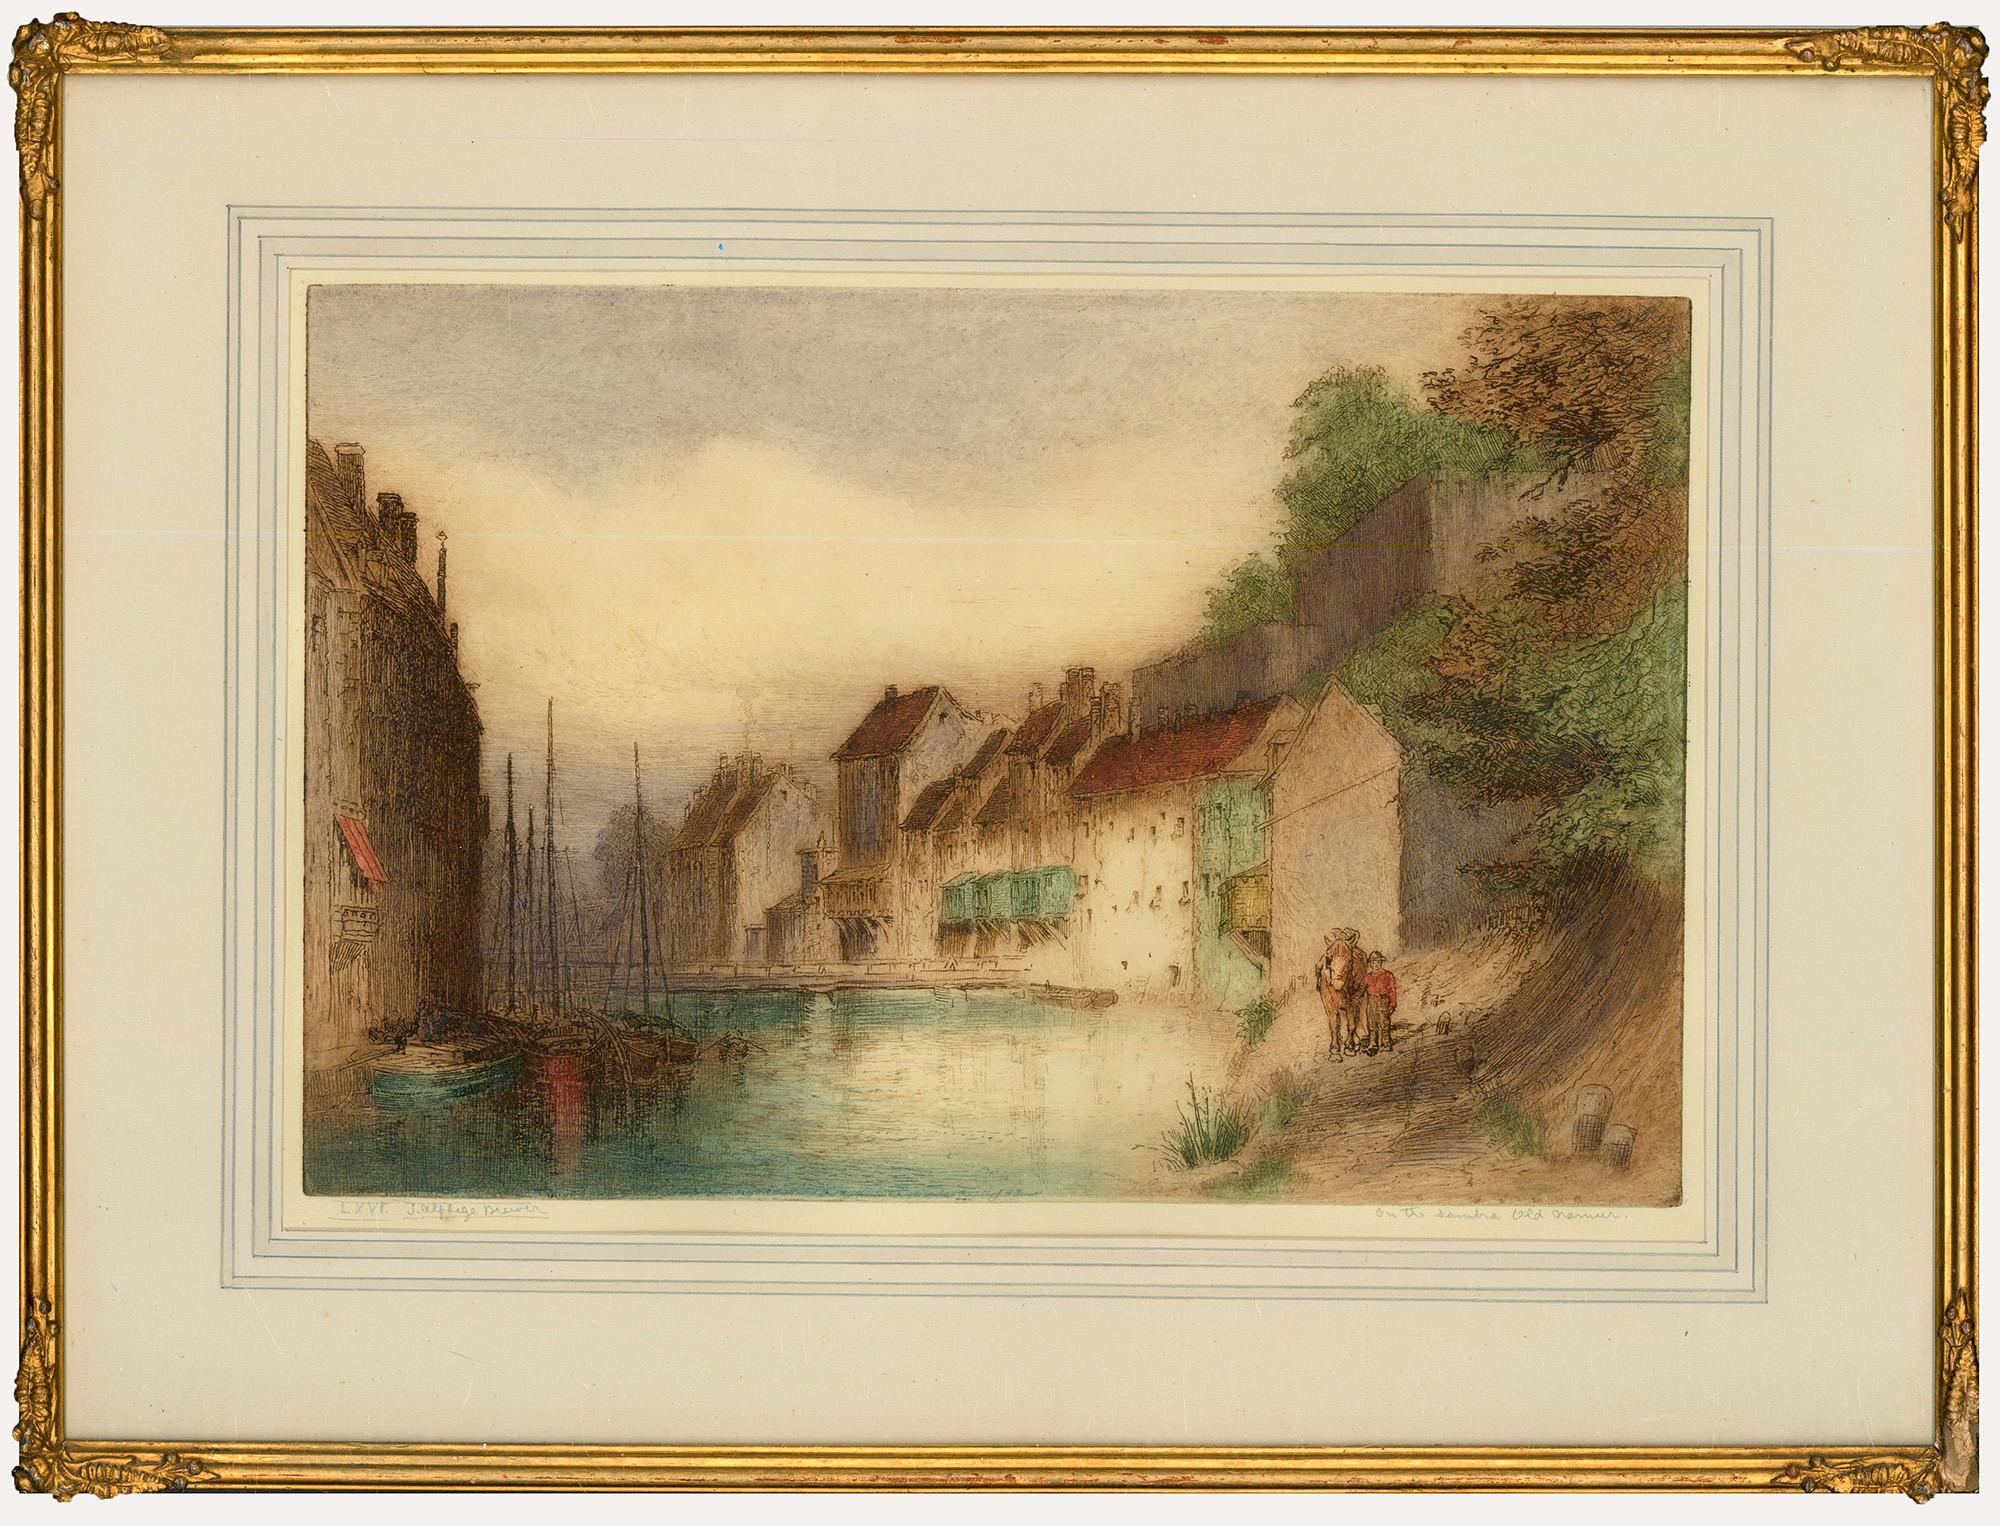 A charming coloured etching depicting the Sambre river in Namur, Belgium. Signed and titled in graphite below the plate lines. Presented in a gilt frame. On paper. 
